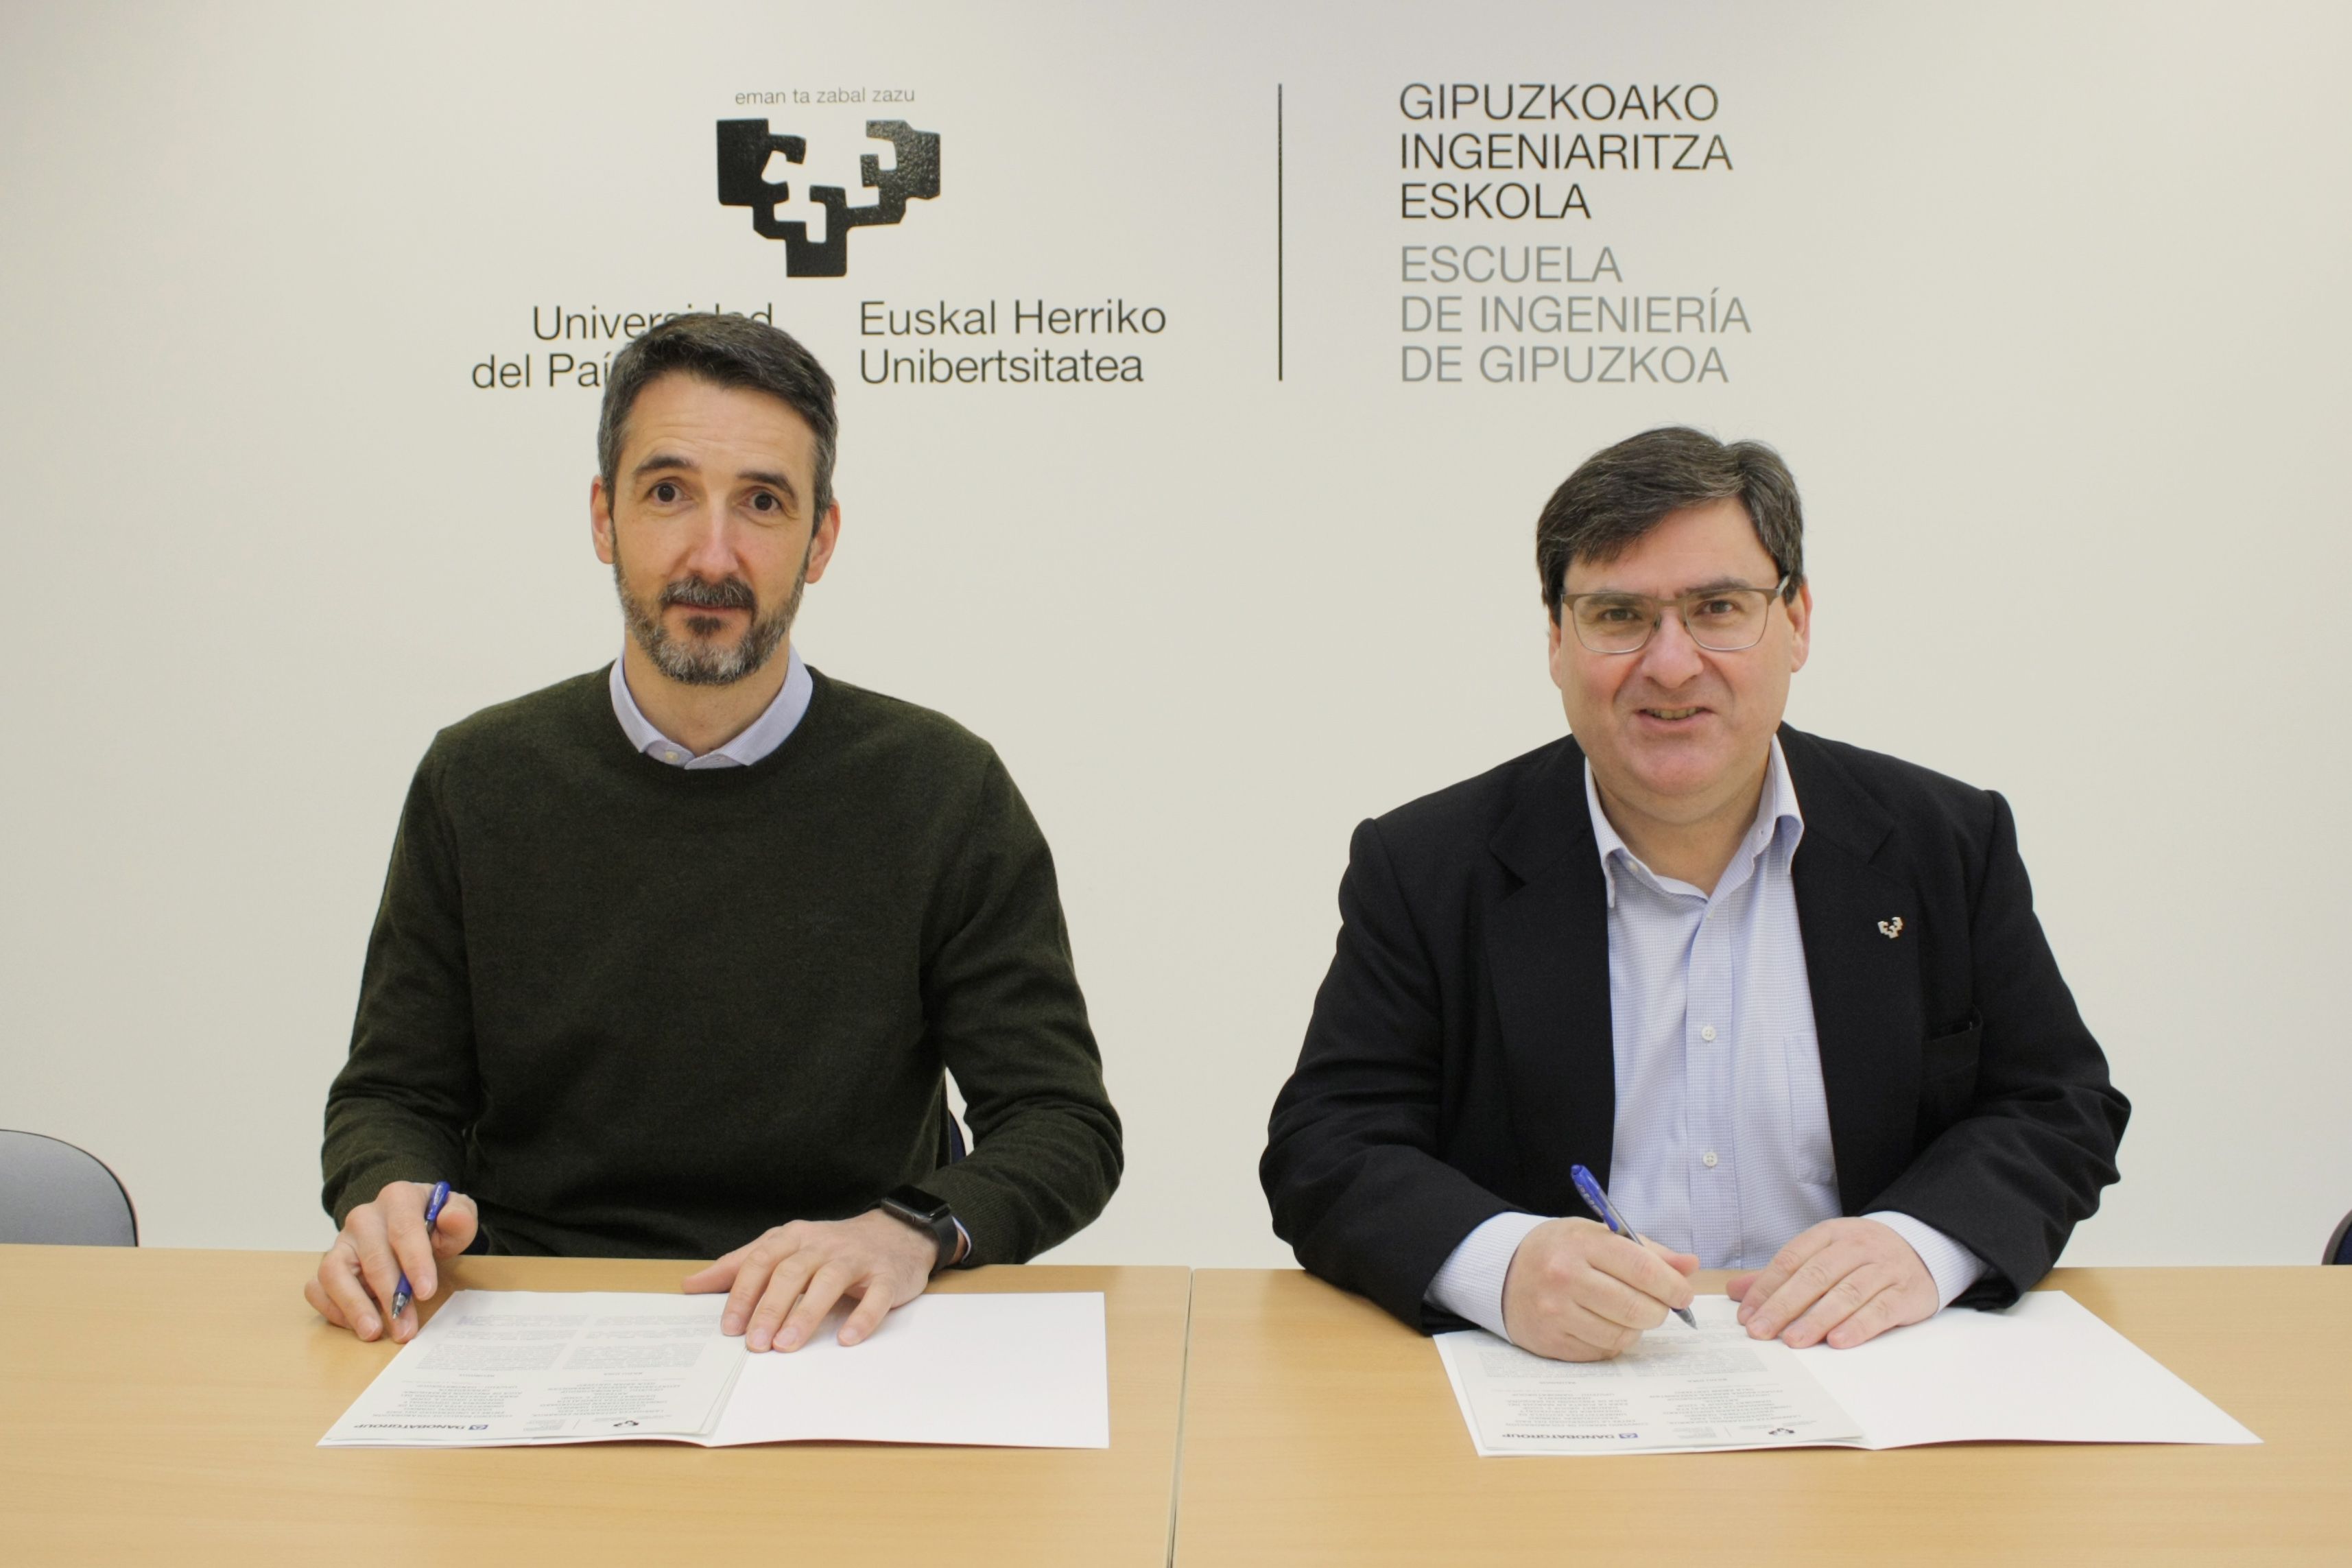 Danobatgroup and the Gipuzkoa School of Engineering collaborate to train professionals in advanced manufacturing